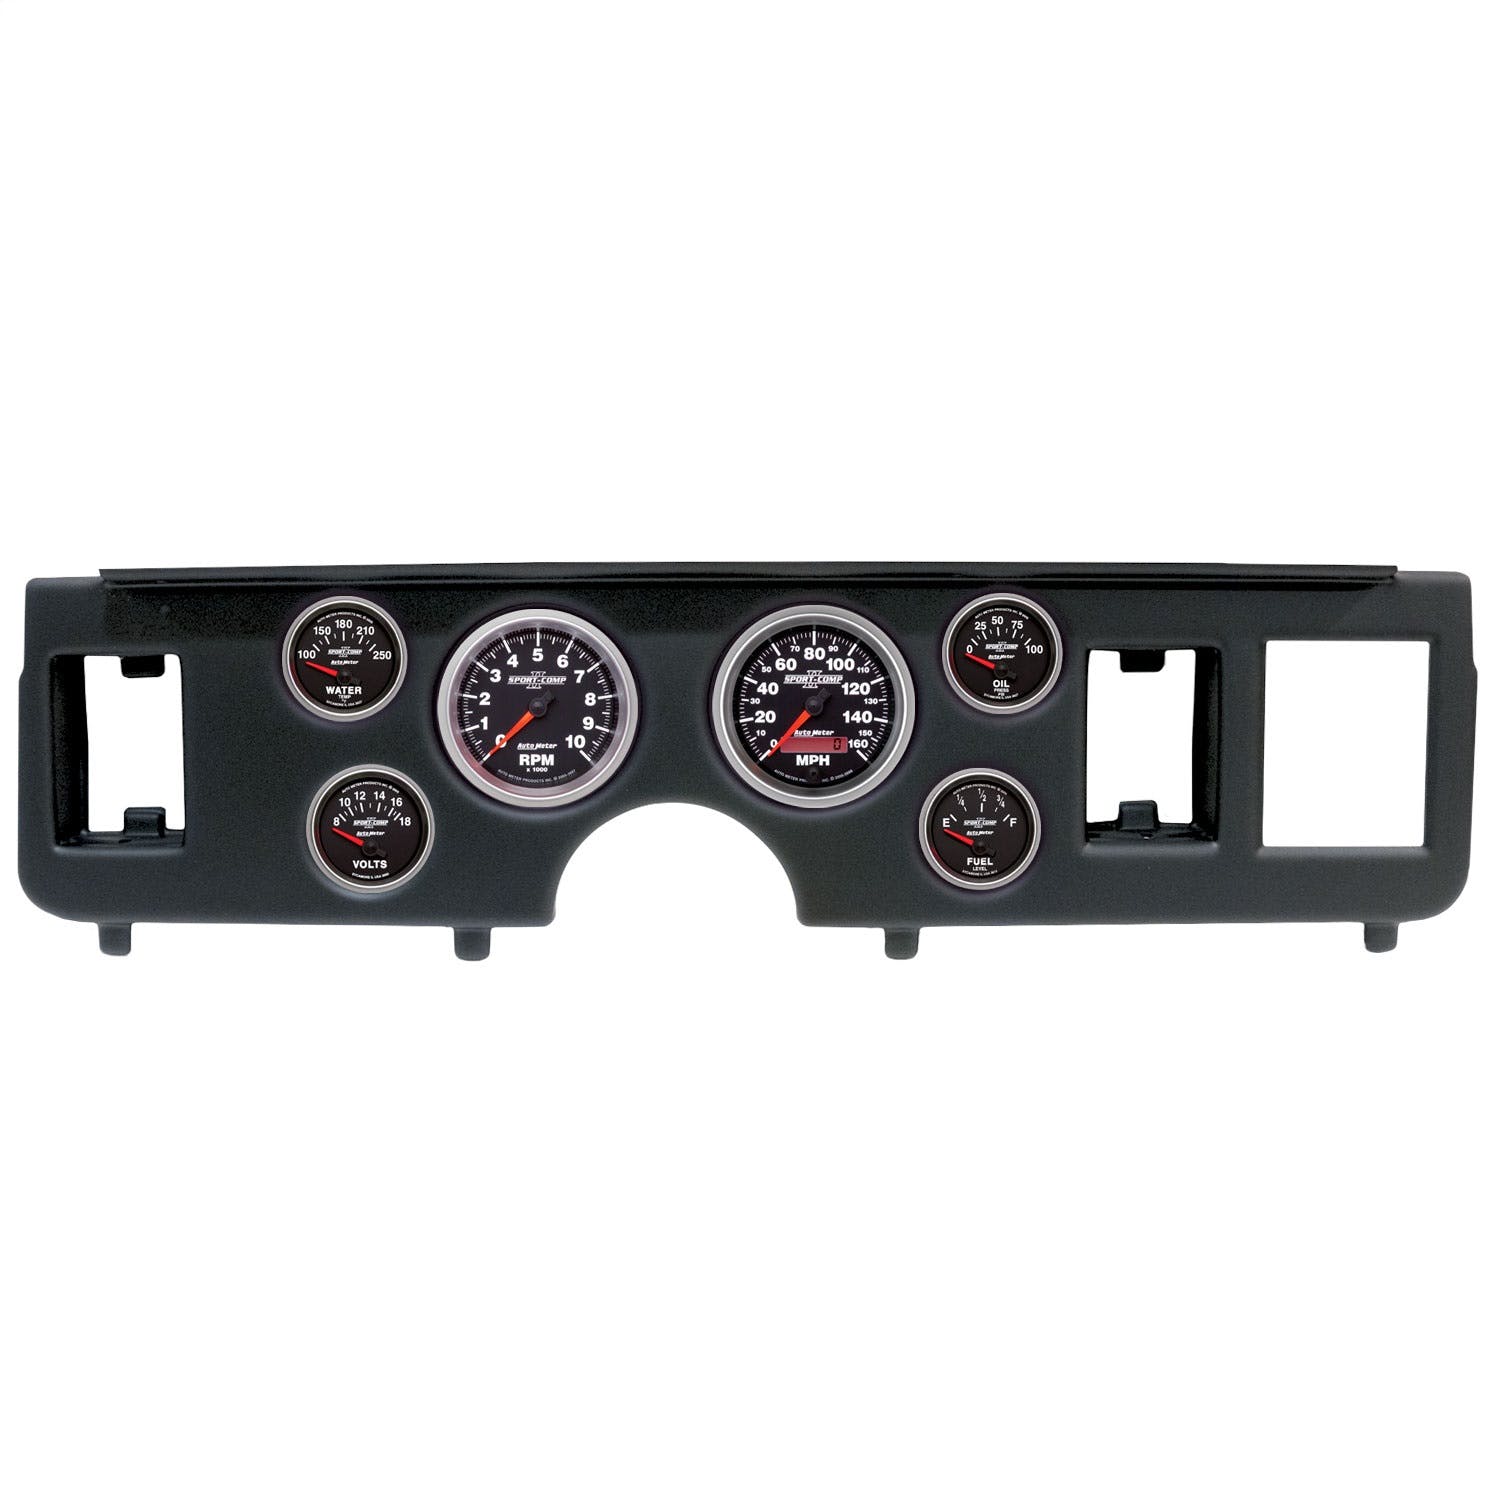 AutoMeter Products 2917-12 6 Gauge Direct-Fit Dash Kit, Ford Mustang 79-86, Sport-Comp II